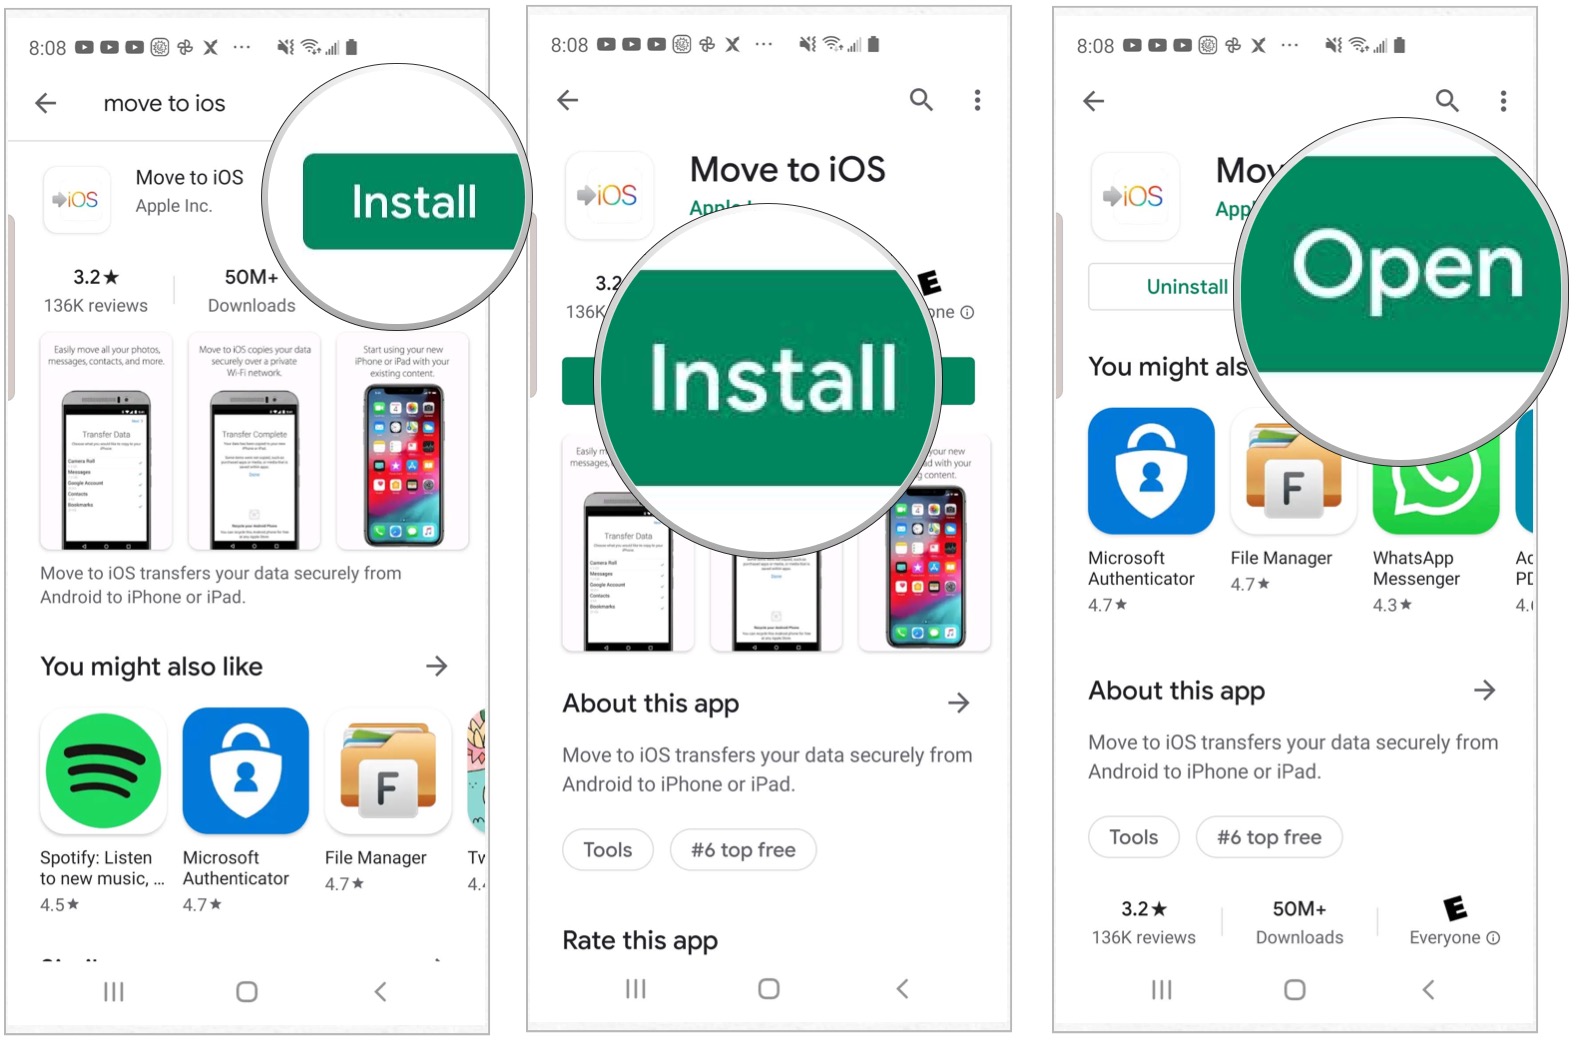 To move your data from Android to iPhone or iPad with Move to iOS, open the Google Play on your Android device, and search for Move to iOS app. Next, open the Move to iOS app listen, tap Install. Choose Open when the app is done downloading.